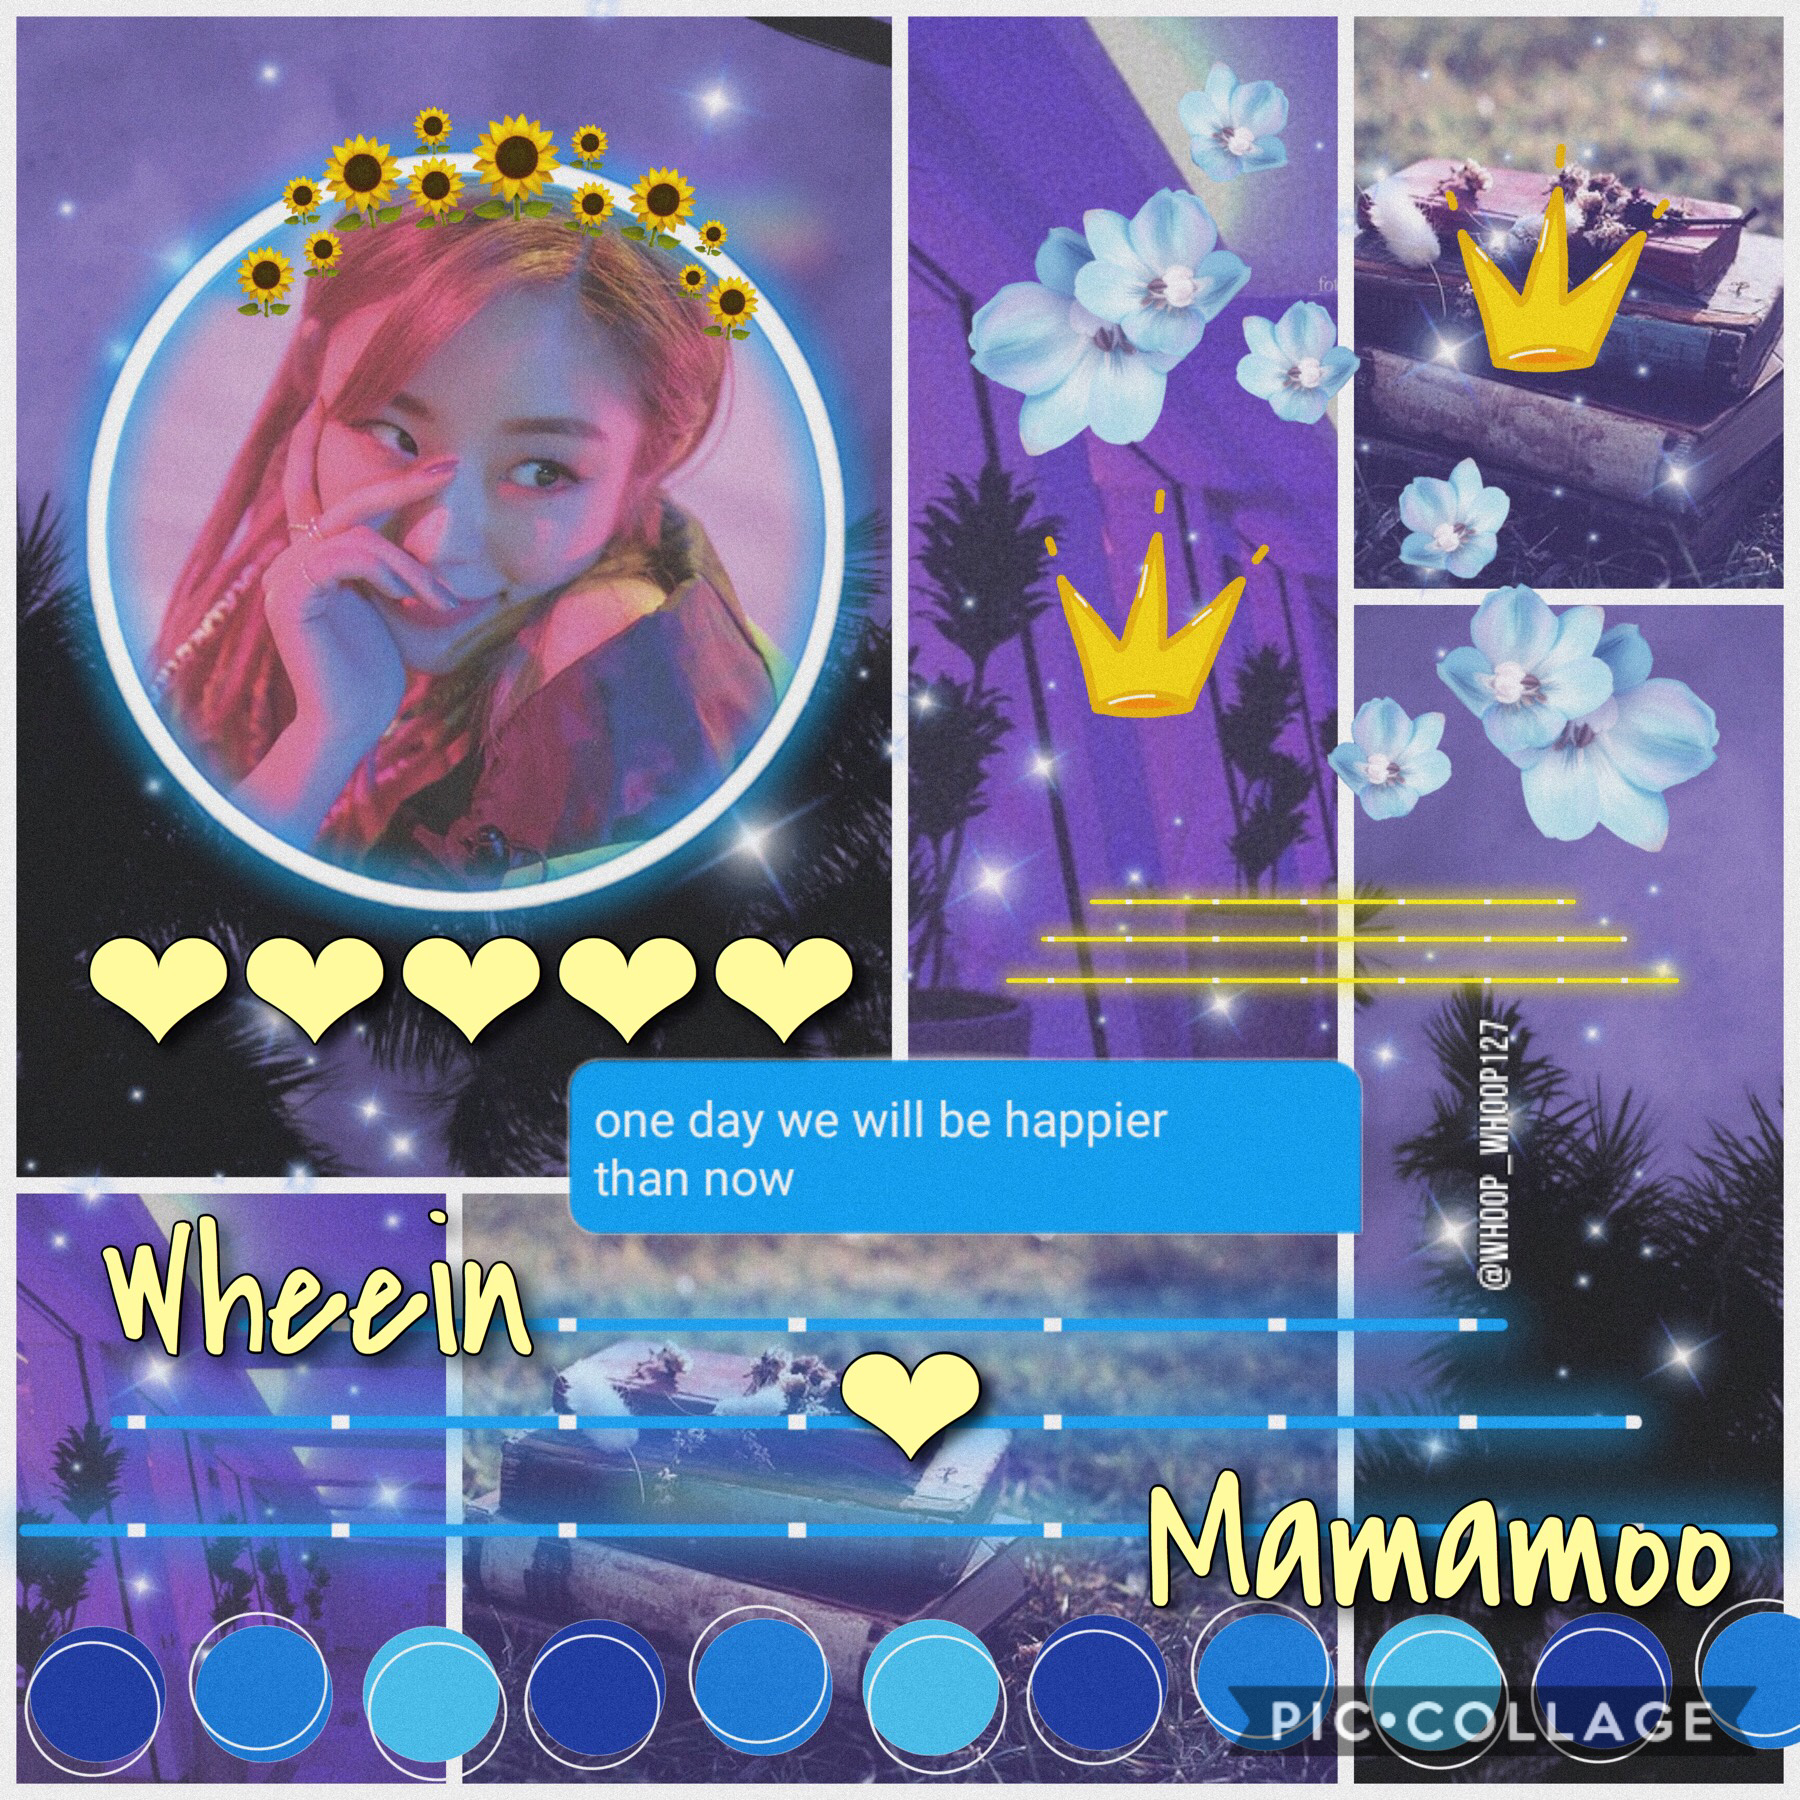 •🚒•
🌷Wheein~Mamamoo🌷
Edit for @Kyungrice!!
Gogobebe is such a bop 😭✊
This is pretty different compared to my usual styles but somehow I got it to work a bit??
I still wanted to add a bit of spring flavor to it bc I mean it is Spring themed requests lol😊